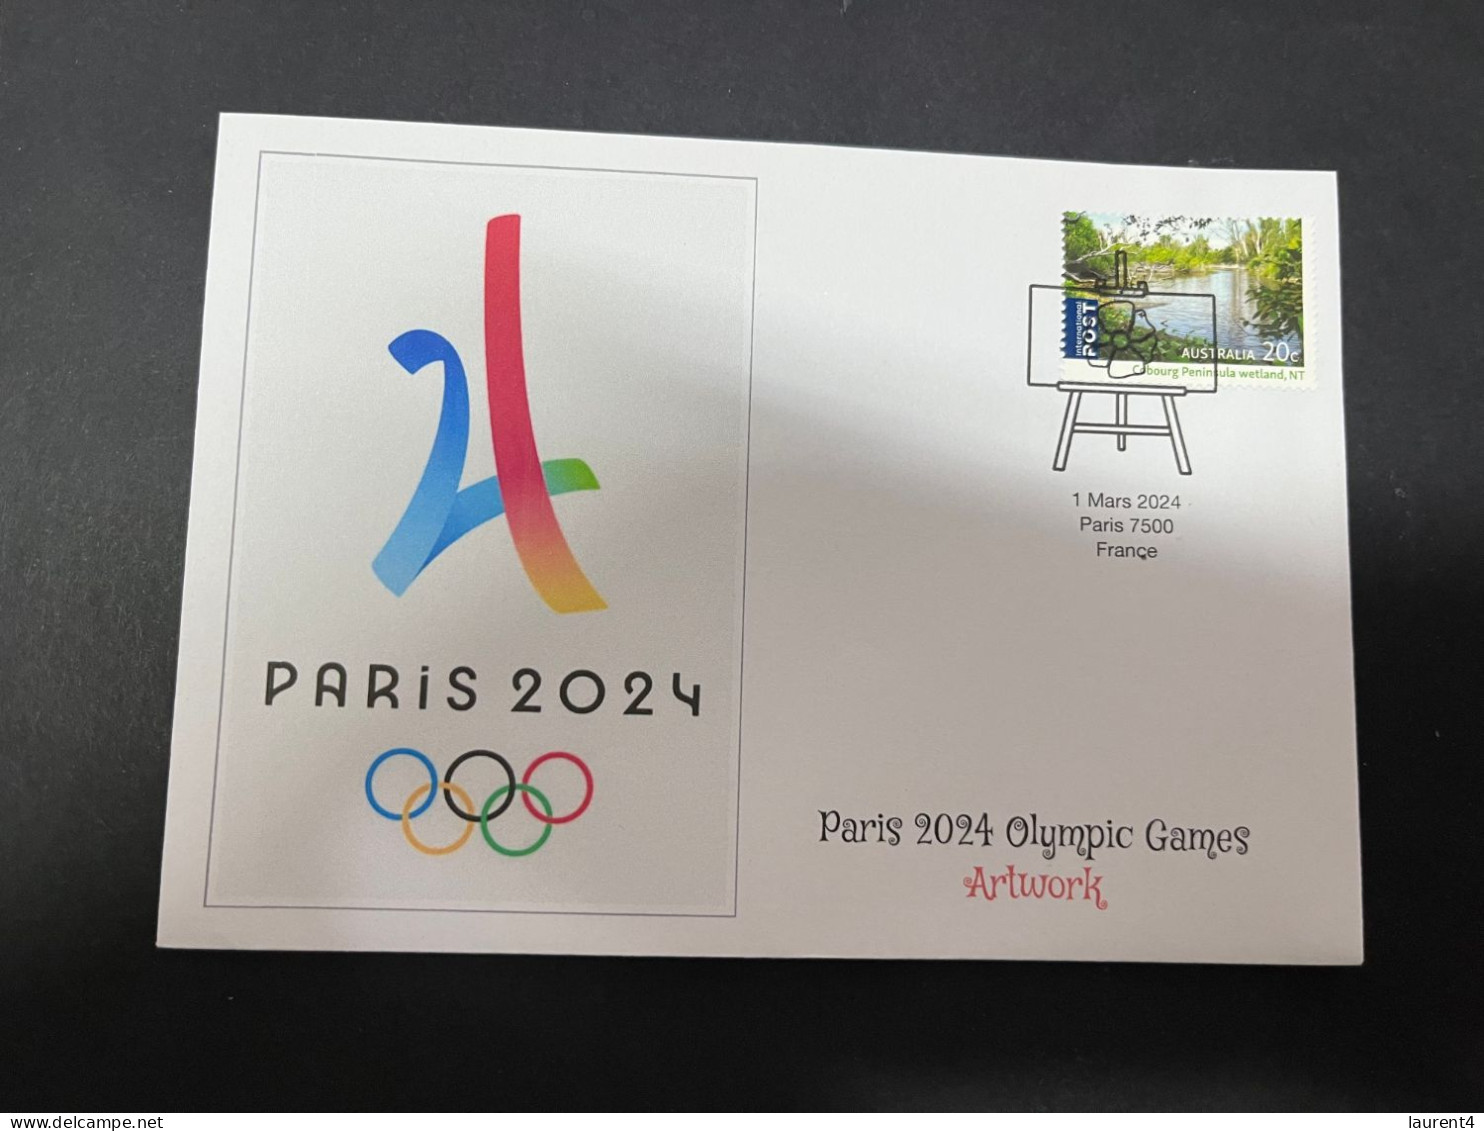 10-3-2024 (2 Y 37) Paris Olympic Games 2024 - 5 (of 12 Covers Series) For The Paris 2024 Olympic Games Artwork - Eté 2024 : Paris